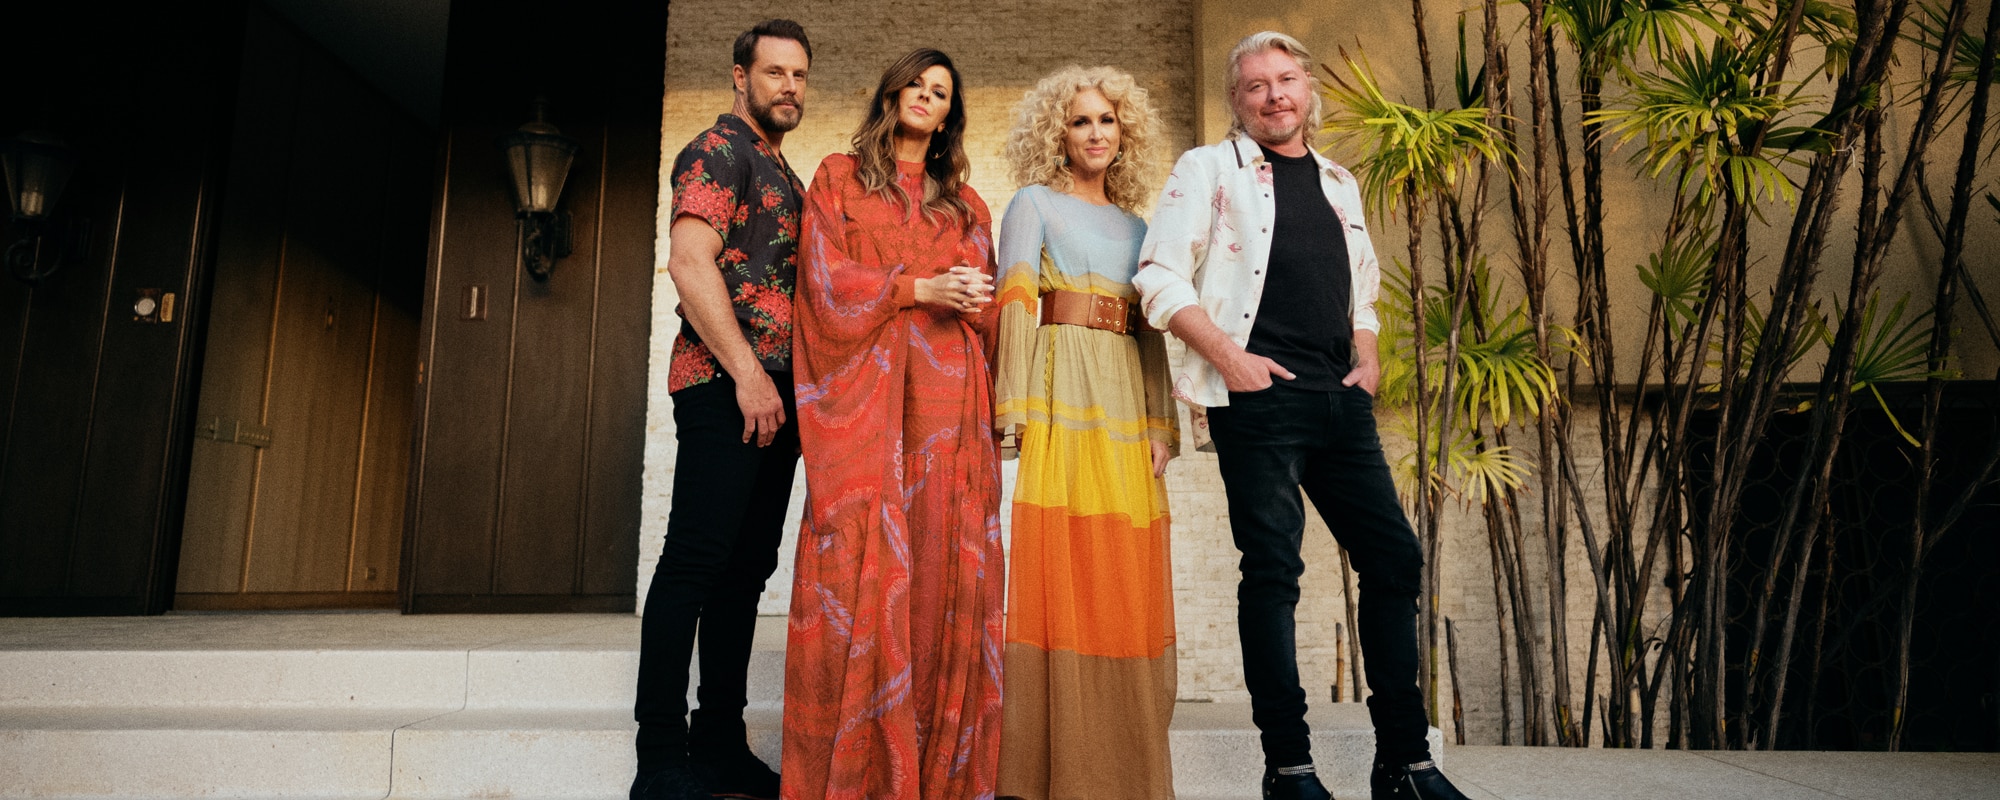 The Story Behind the Song: Little Big Town’s “Wine, Beer, Whiskey”